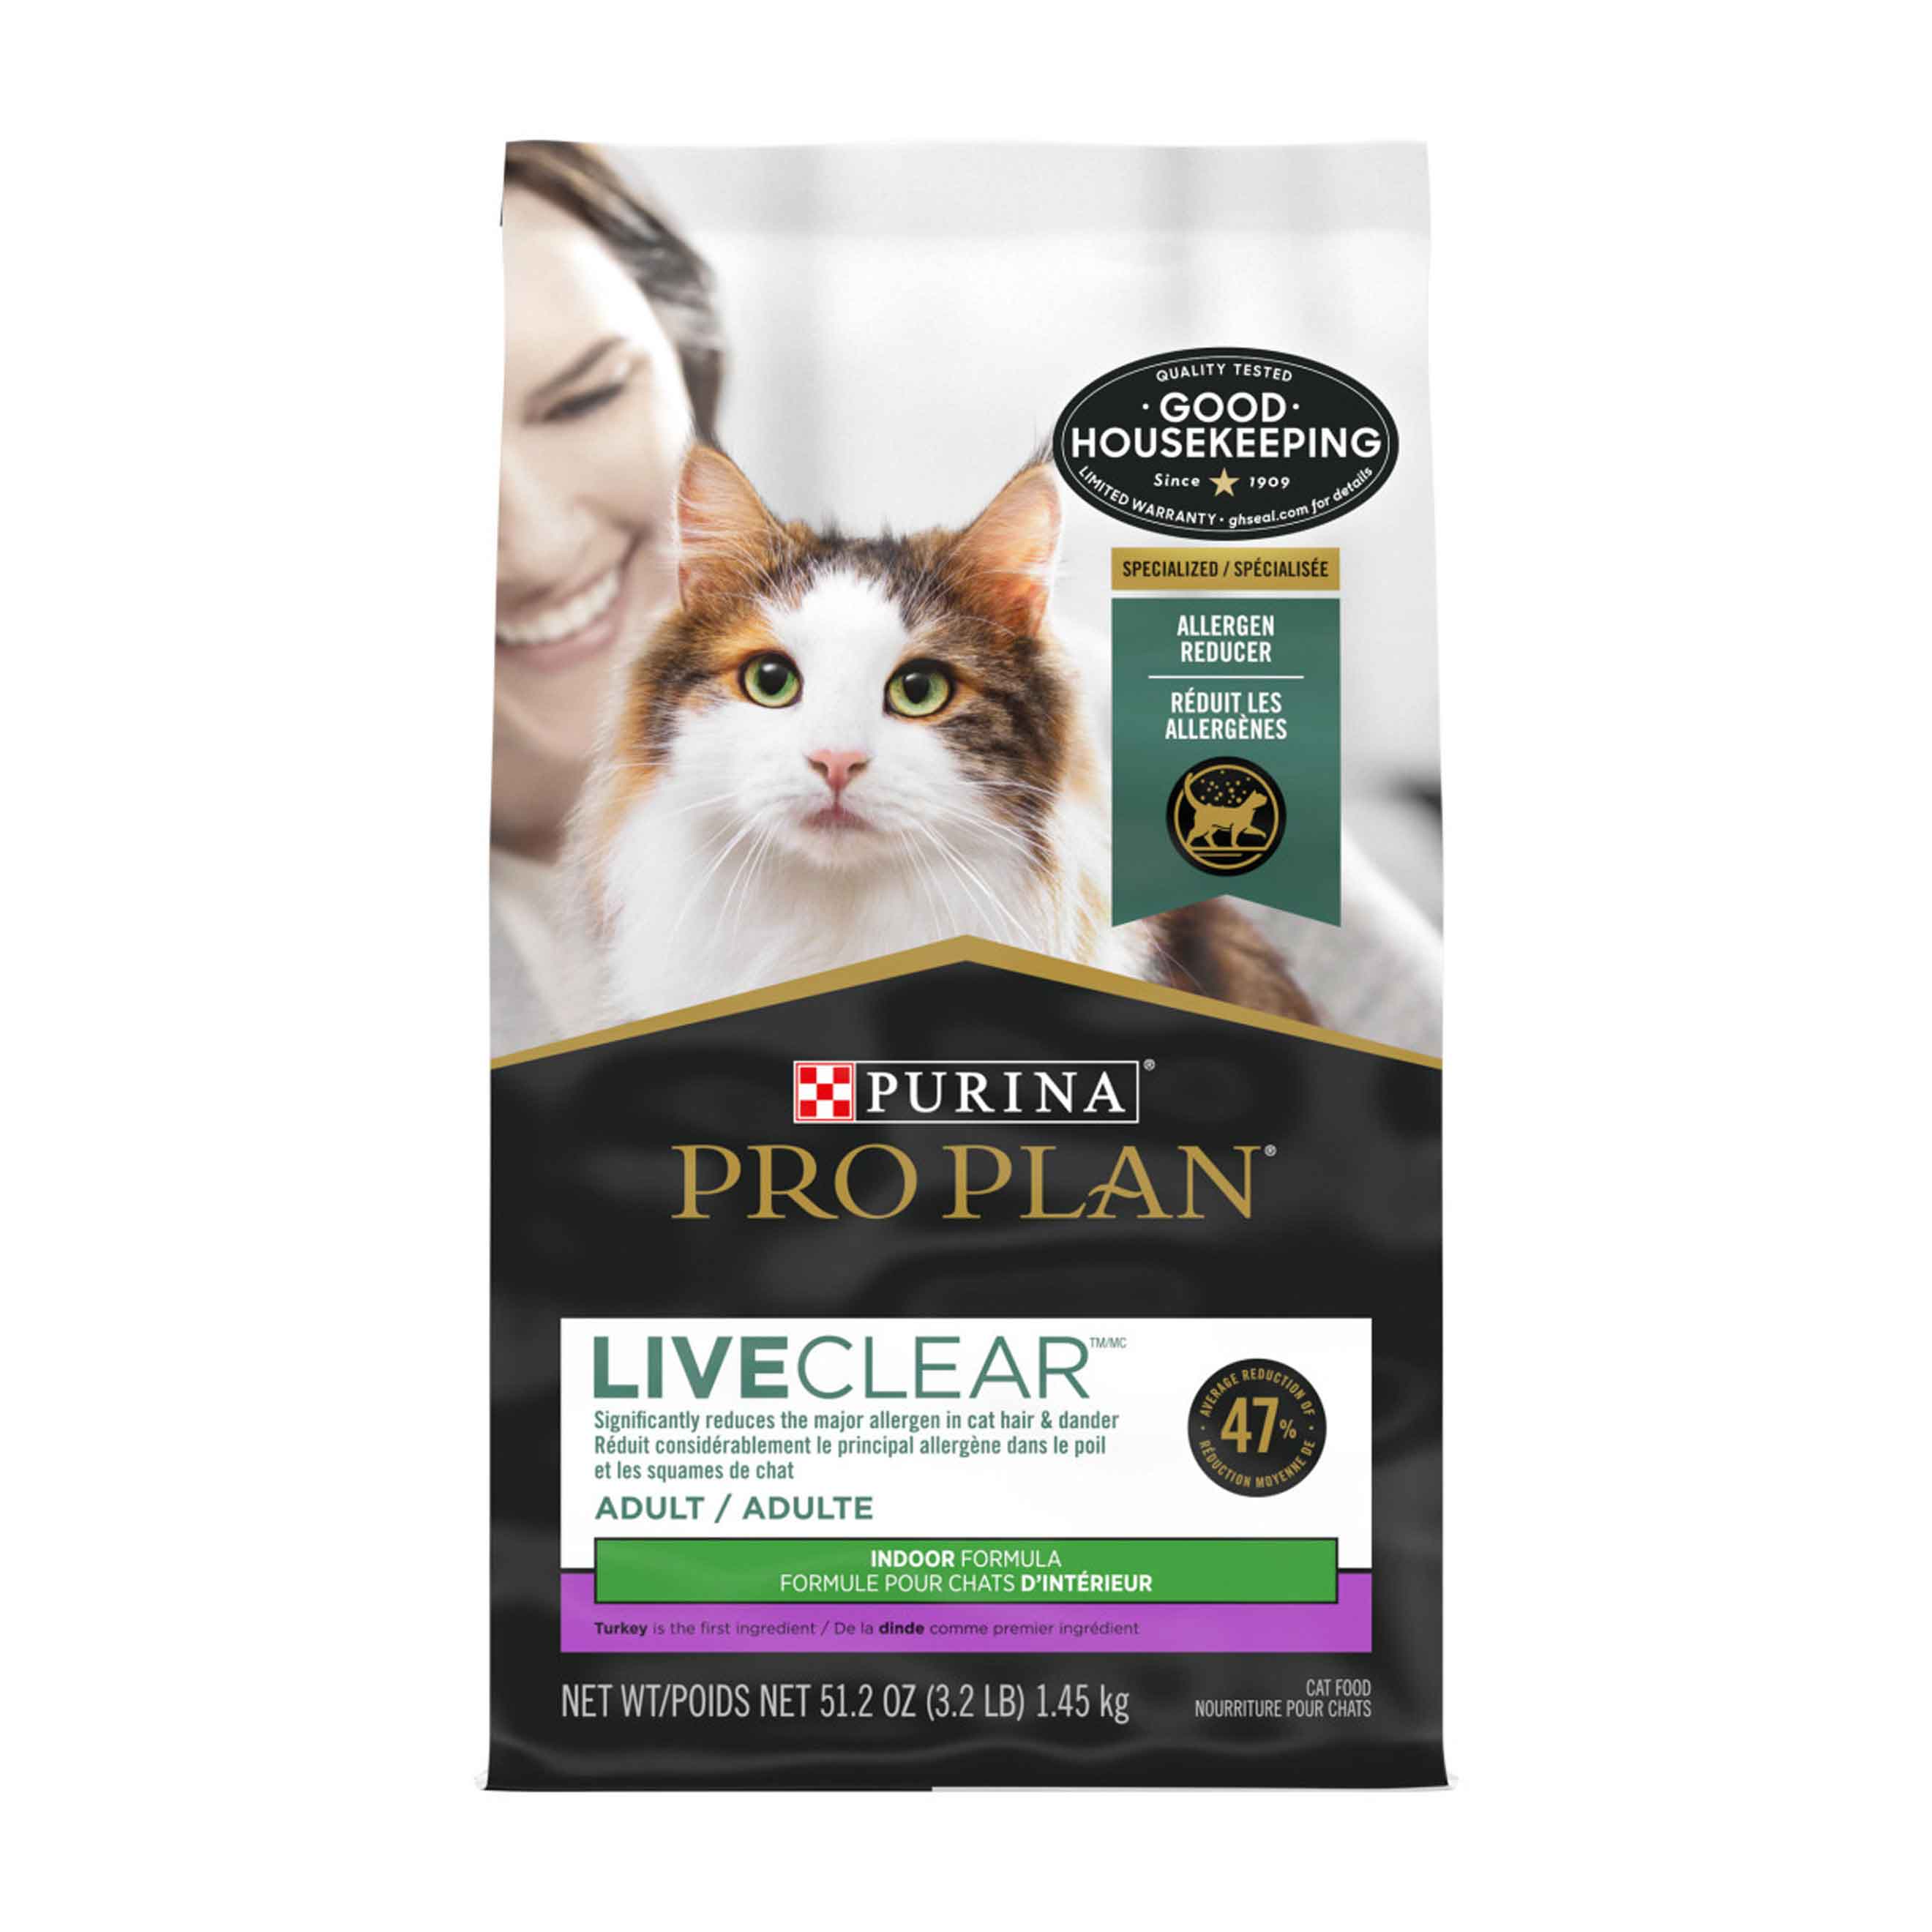 Purina Pro Plan High Protein, Indoor Dry Cat Food, LIVECLEAR Adult Indoor Formula - 3.2 Pound Bag